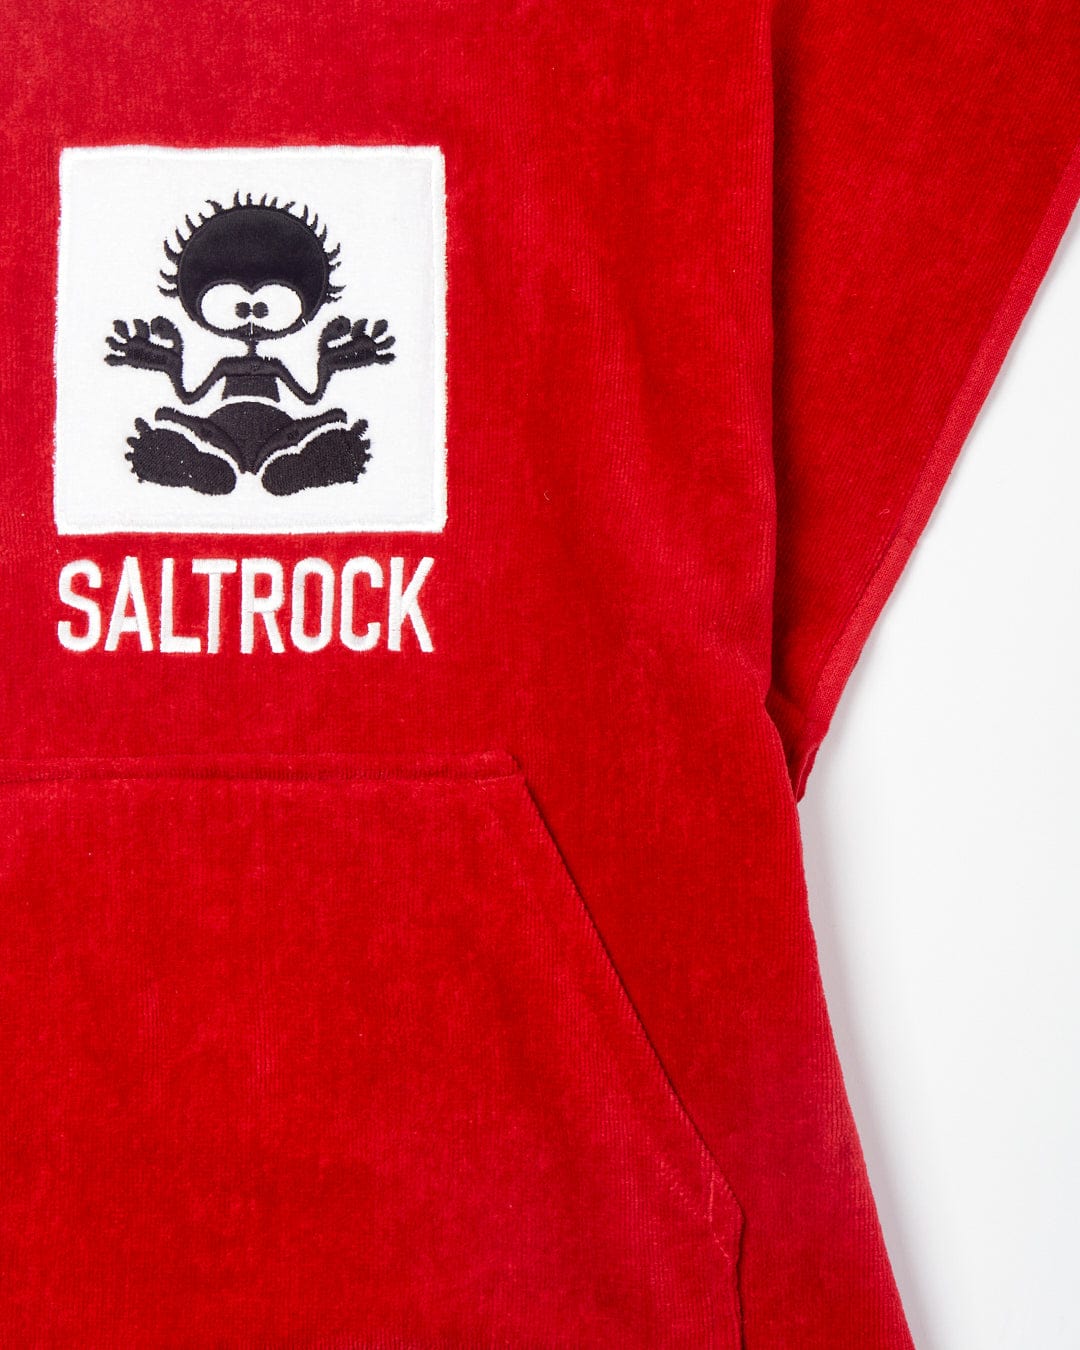 Close-up of a red Corp - Kids Changing Robe - Red towel with a white Saltrock logo featuring a stylized humanoid figure.